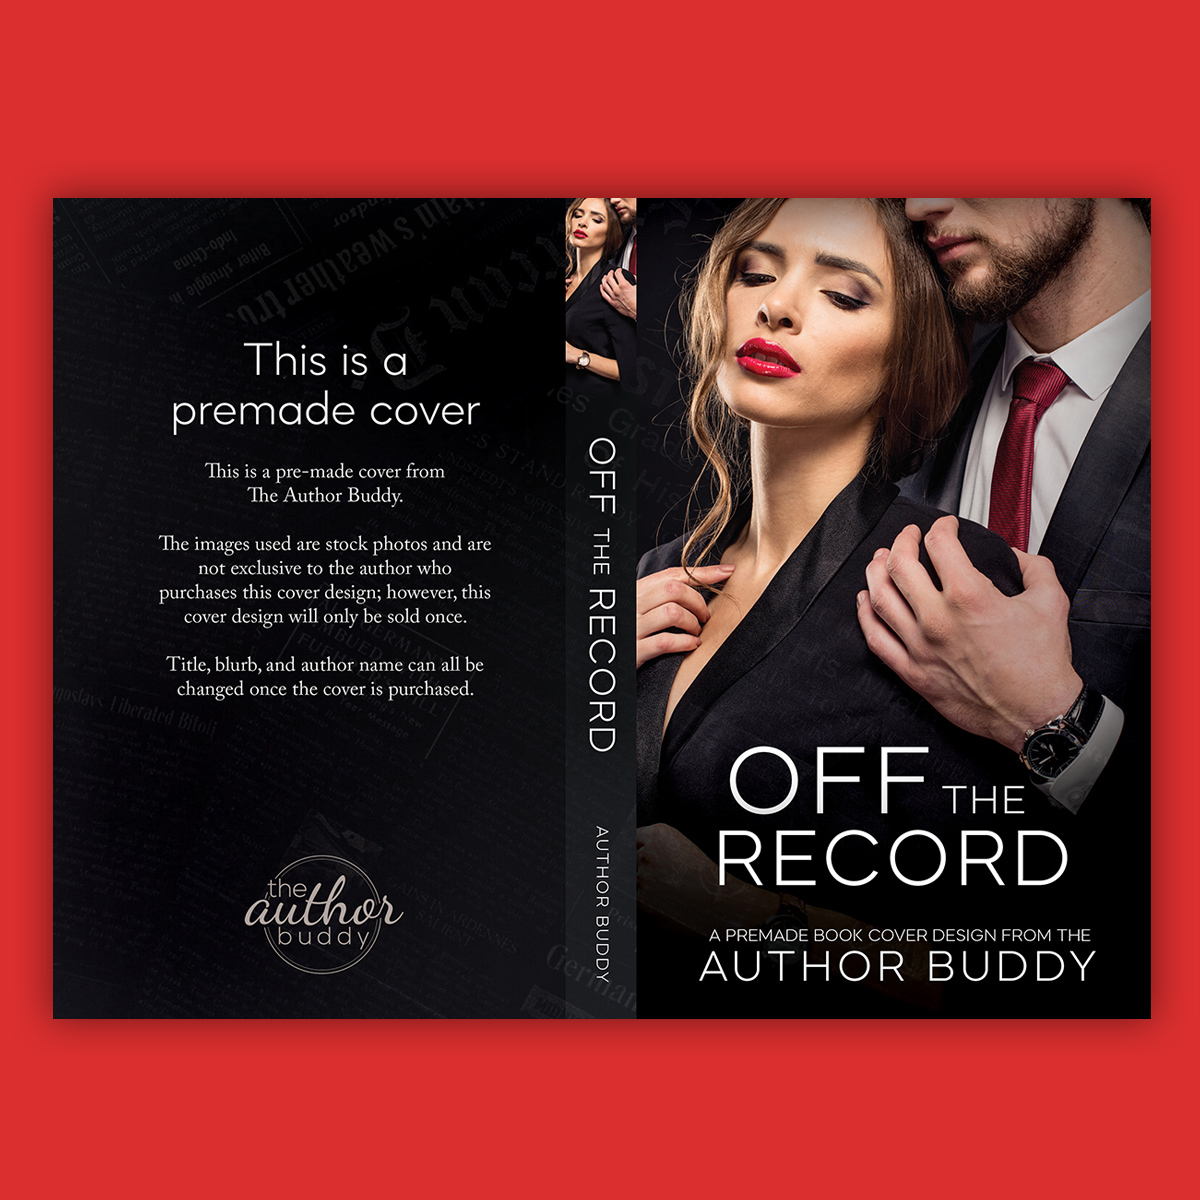 Off The Record - Premade Romantic Suspense Book Cover from The Author Buddy